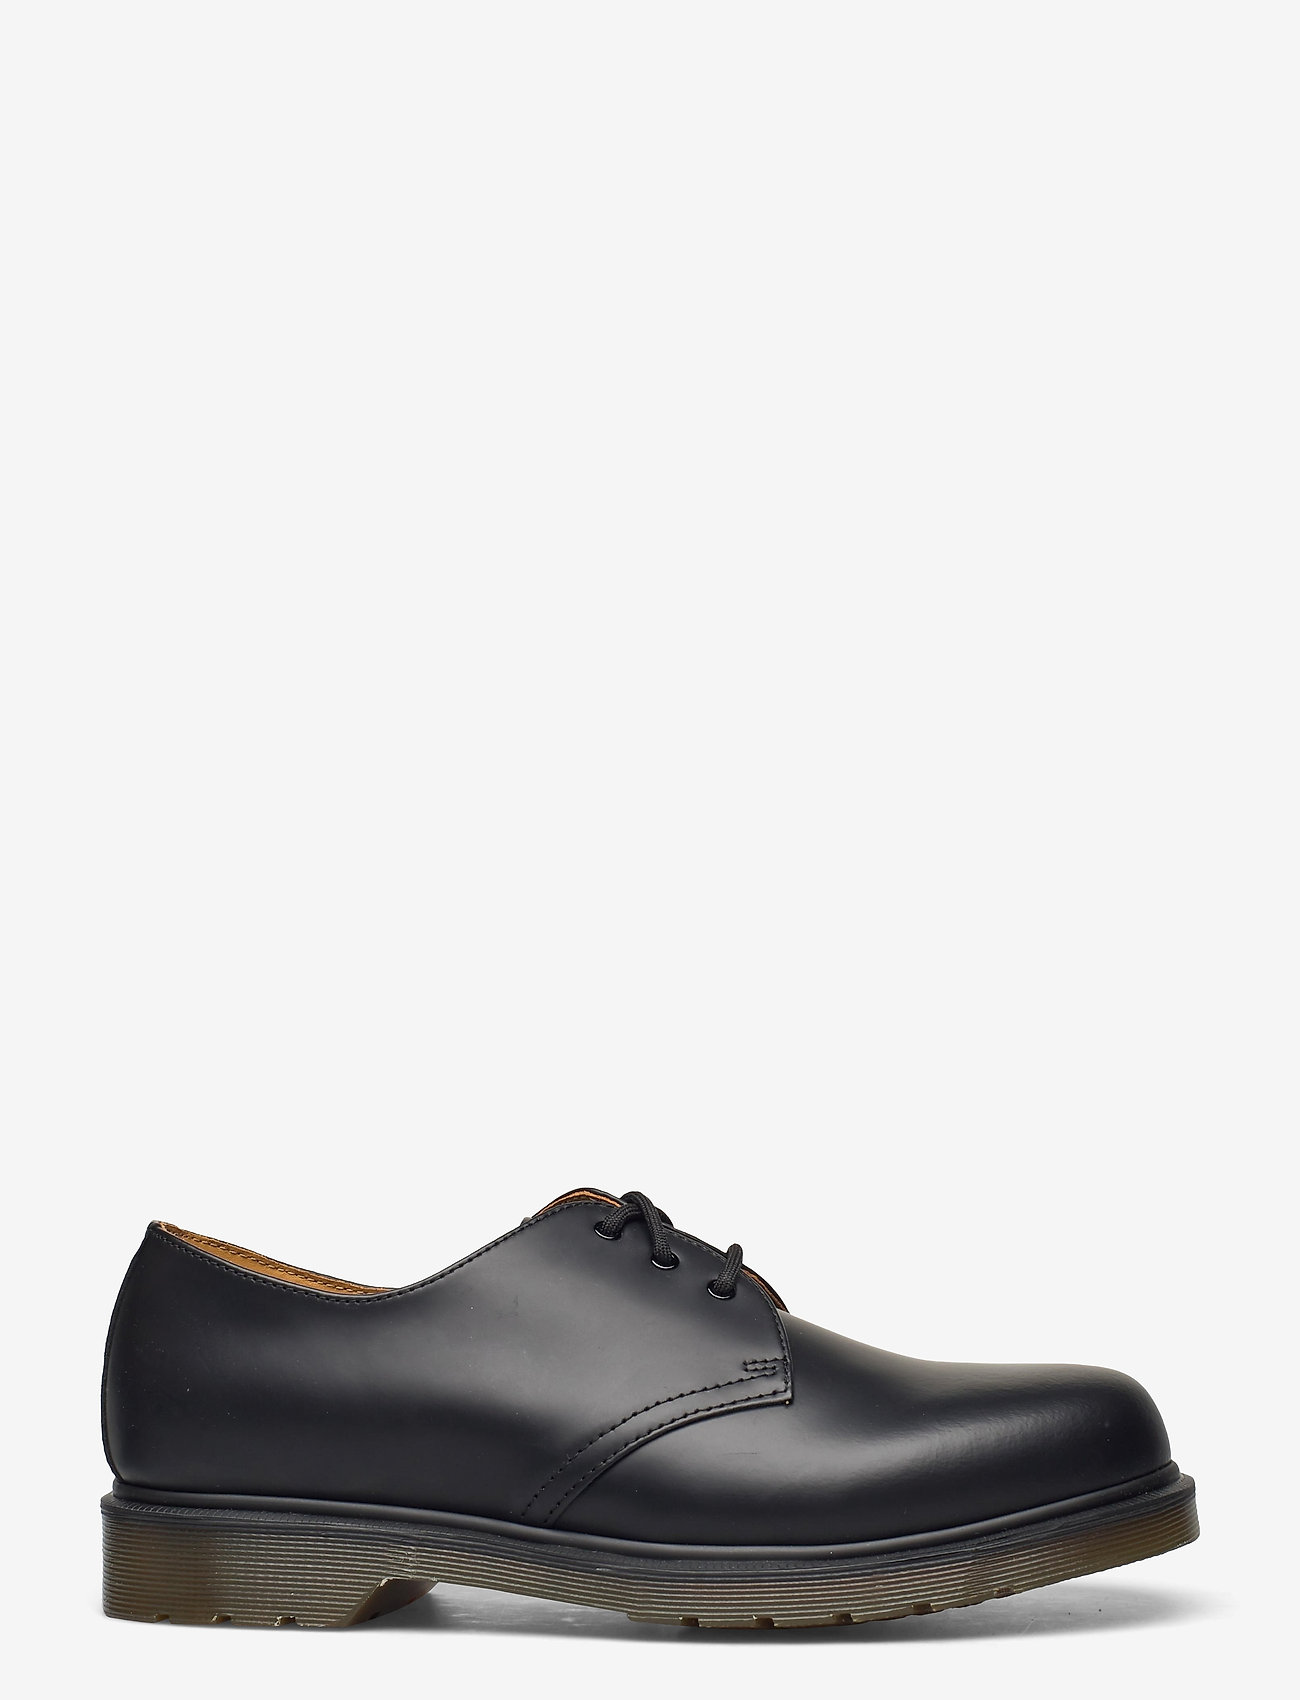 Dr. Martens - 1461 Pw Black Smooth - chaussures oxford - black - 1